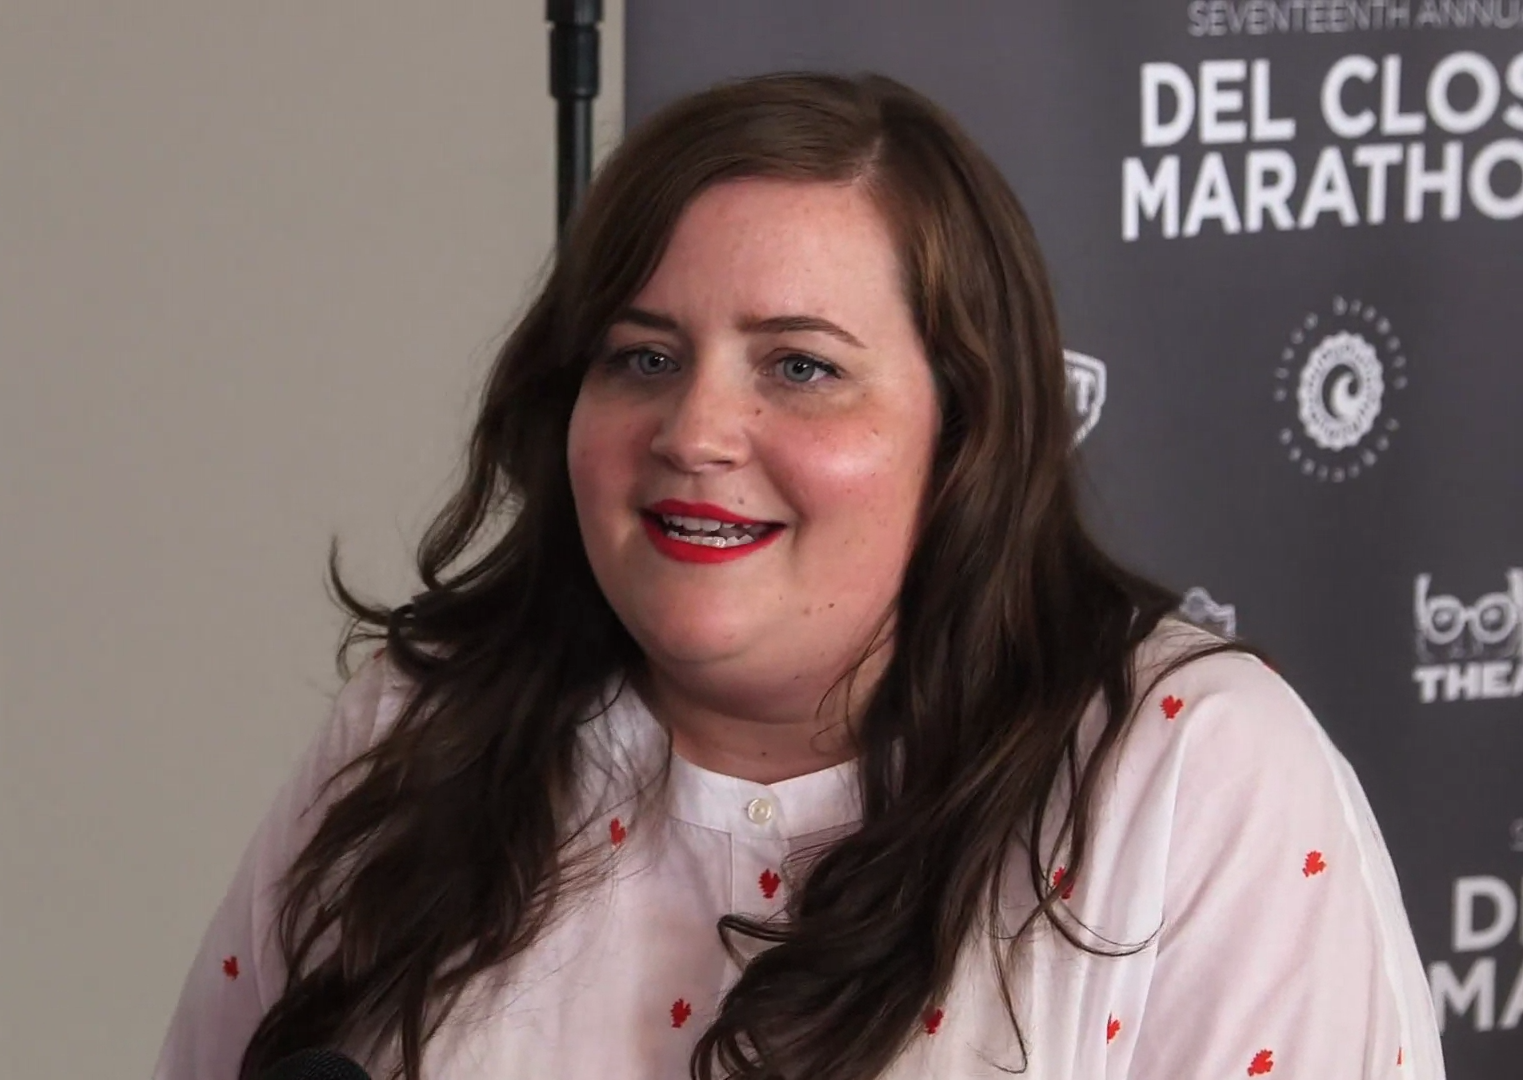 Aidy Bryant during an interview